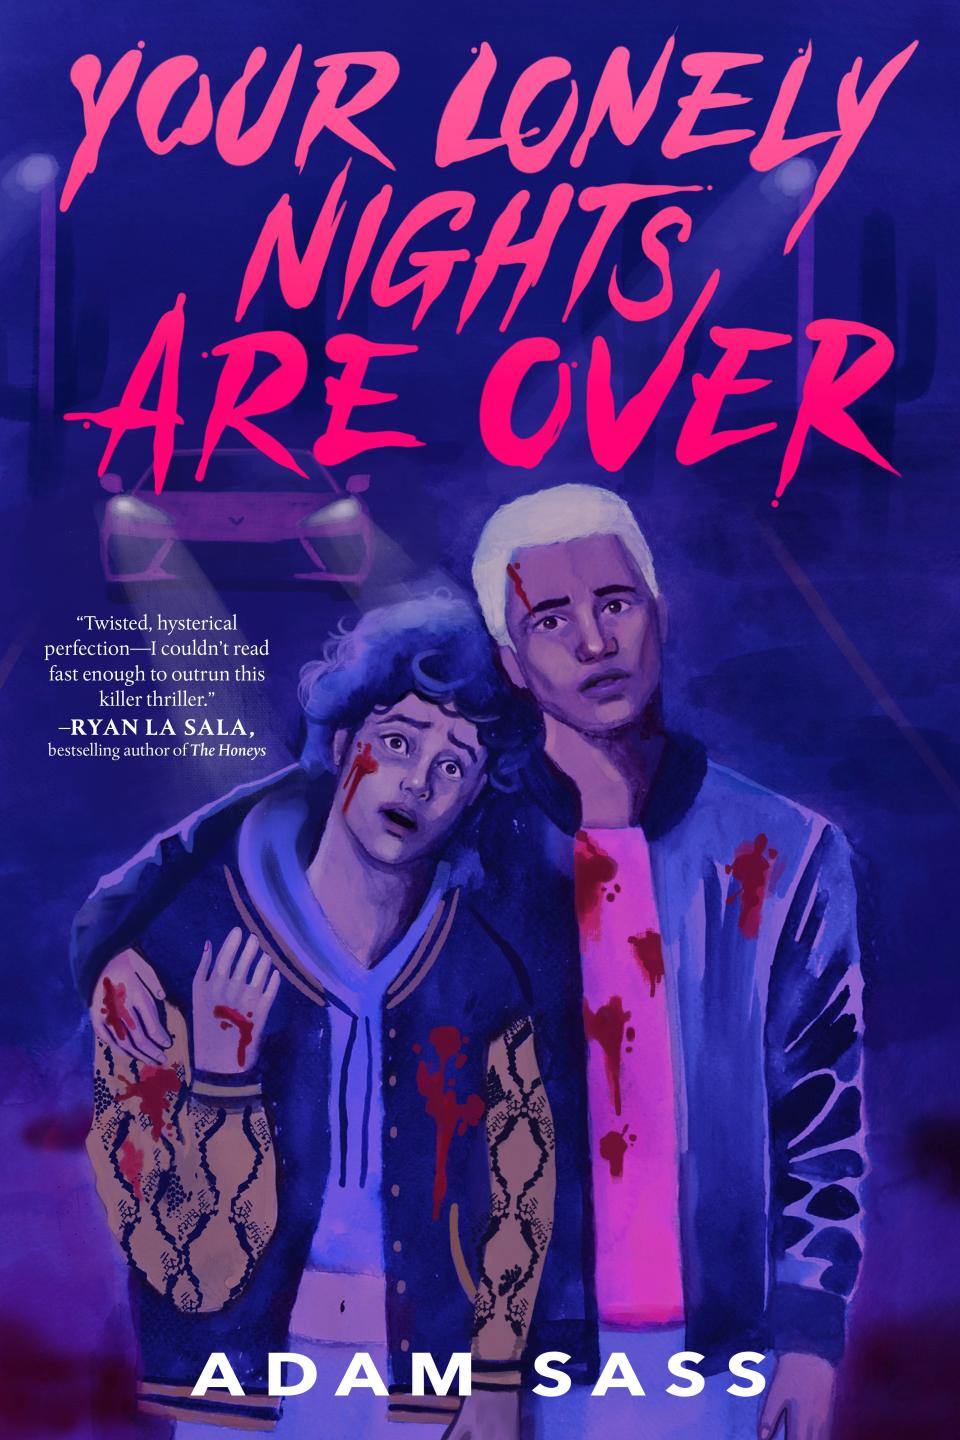 "Your Lonely Nights Are Over," by Adam Sass.